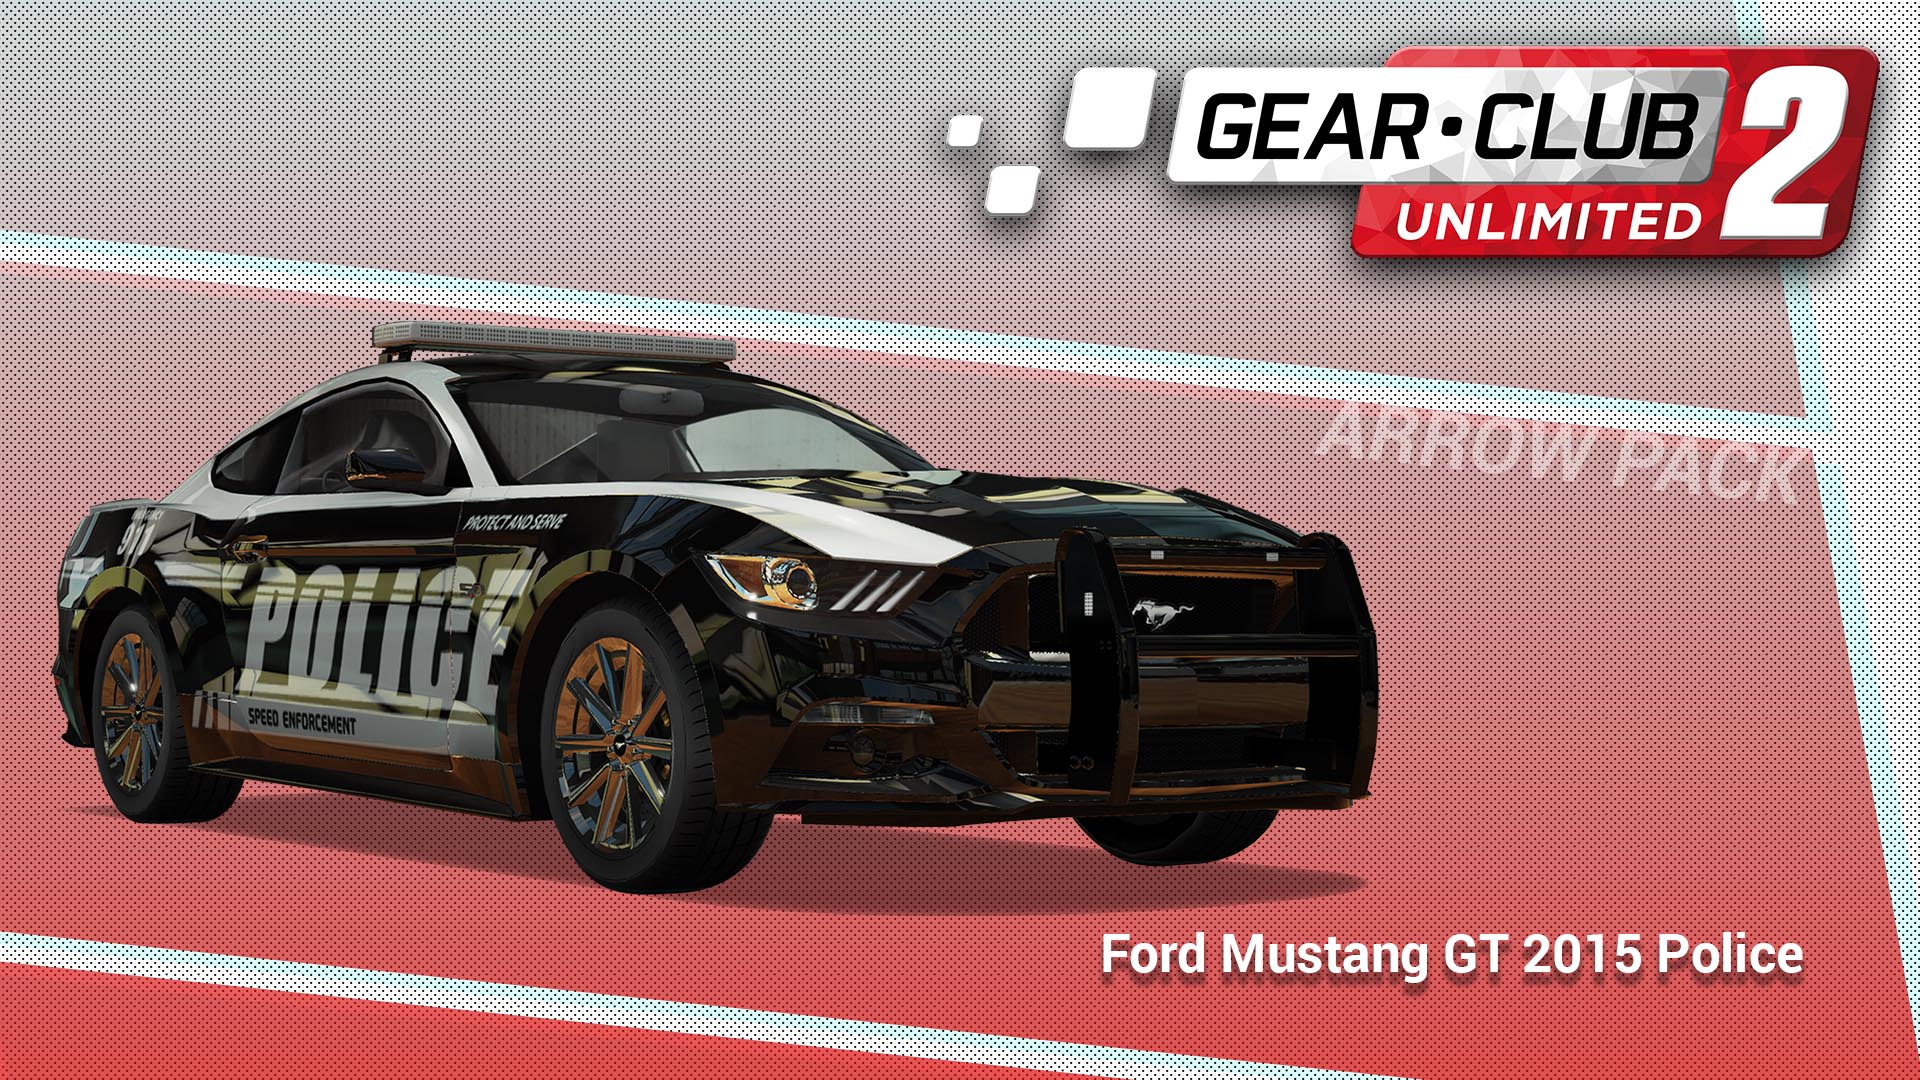 Ford Mustang GT 2015 Police - Gear.Club Unlimited 2